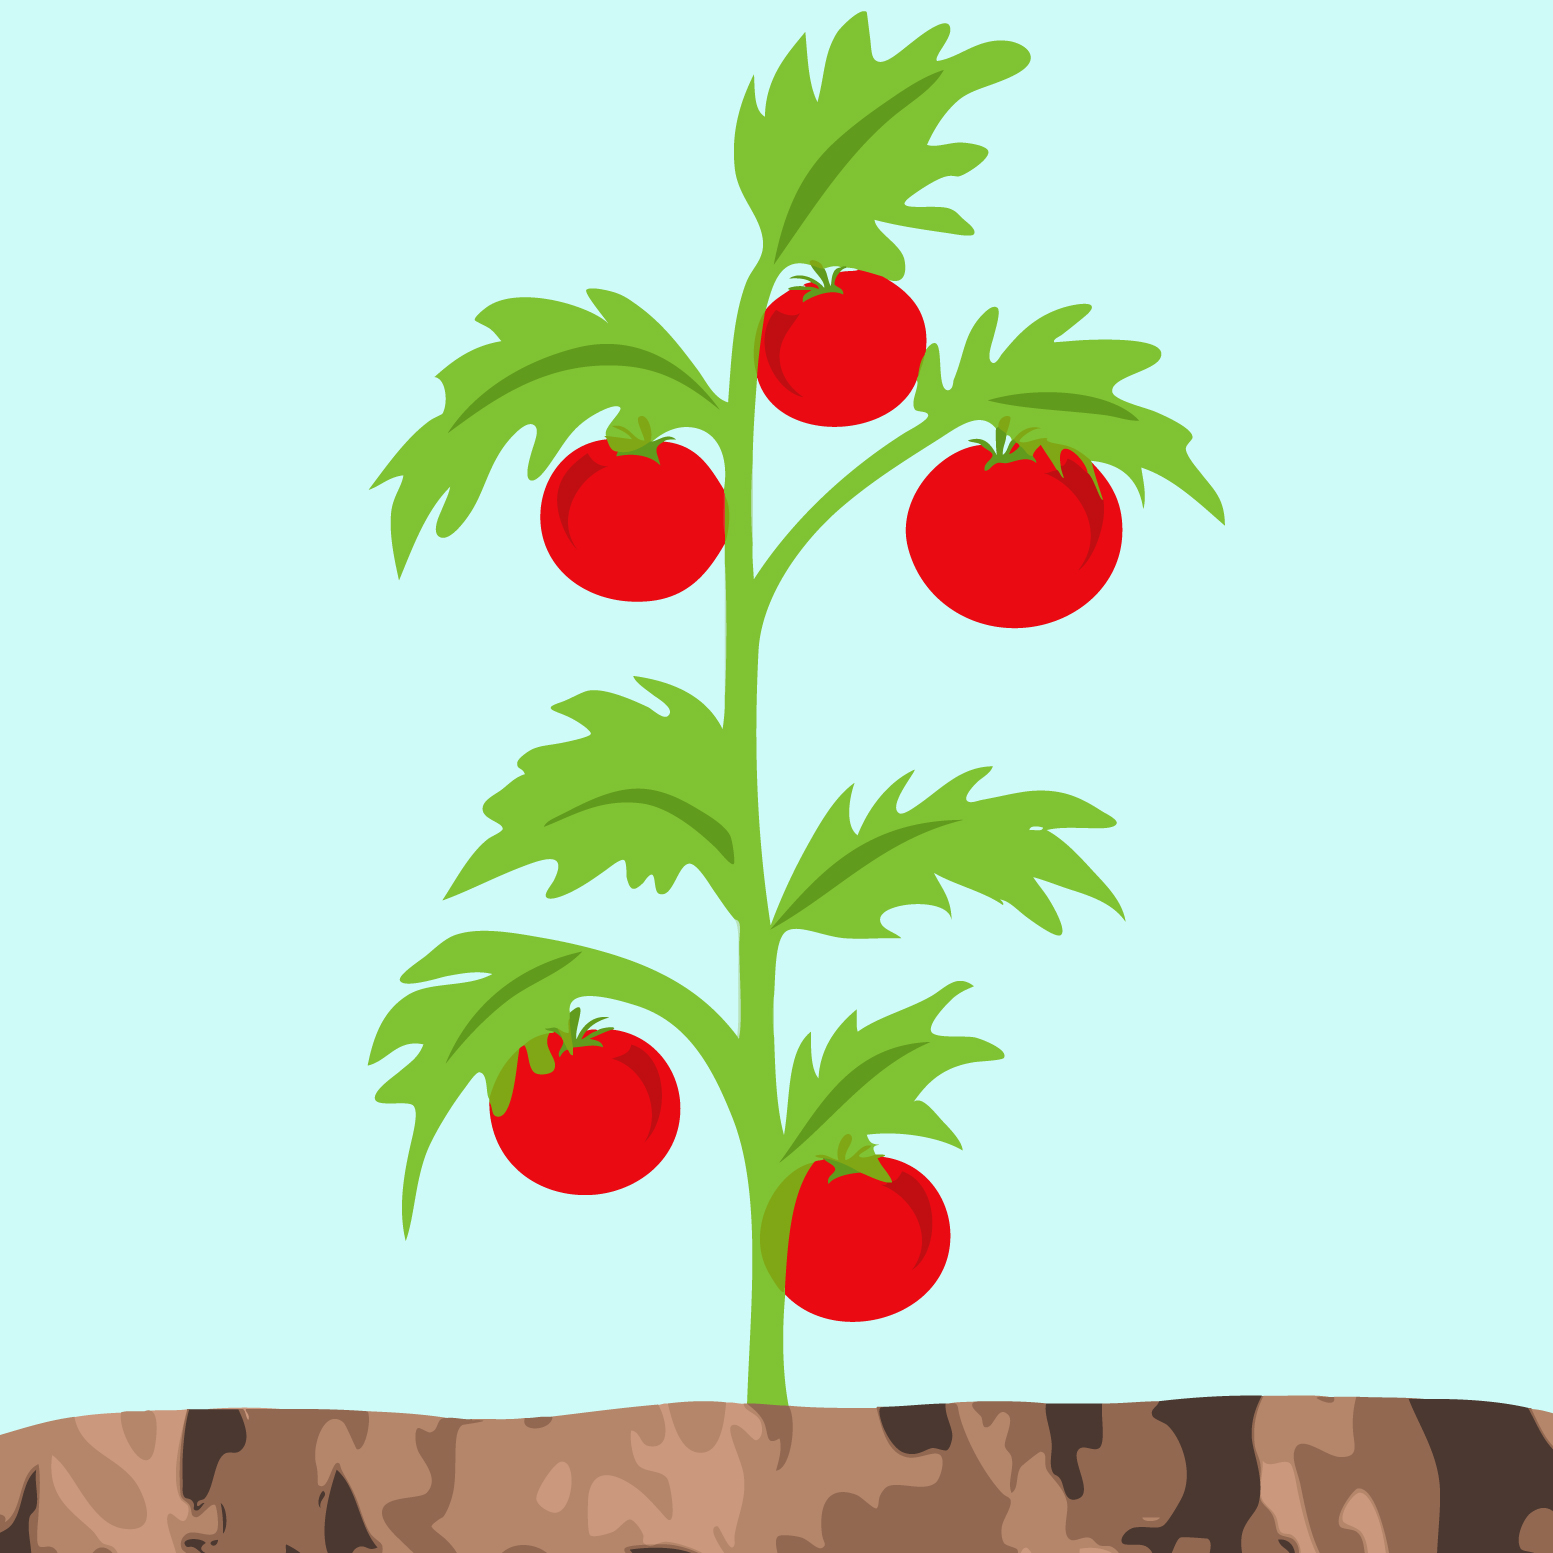 Early Learning Resources Tomato plant - Free Early Years and Primary